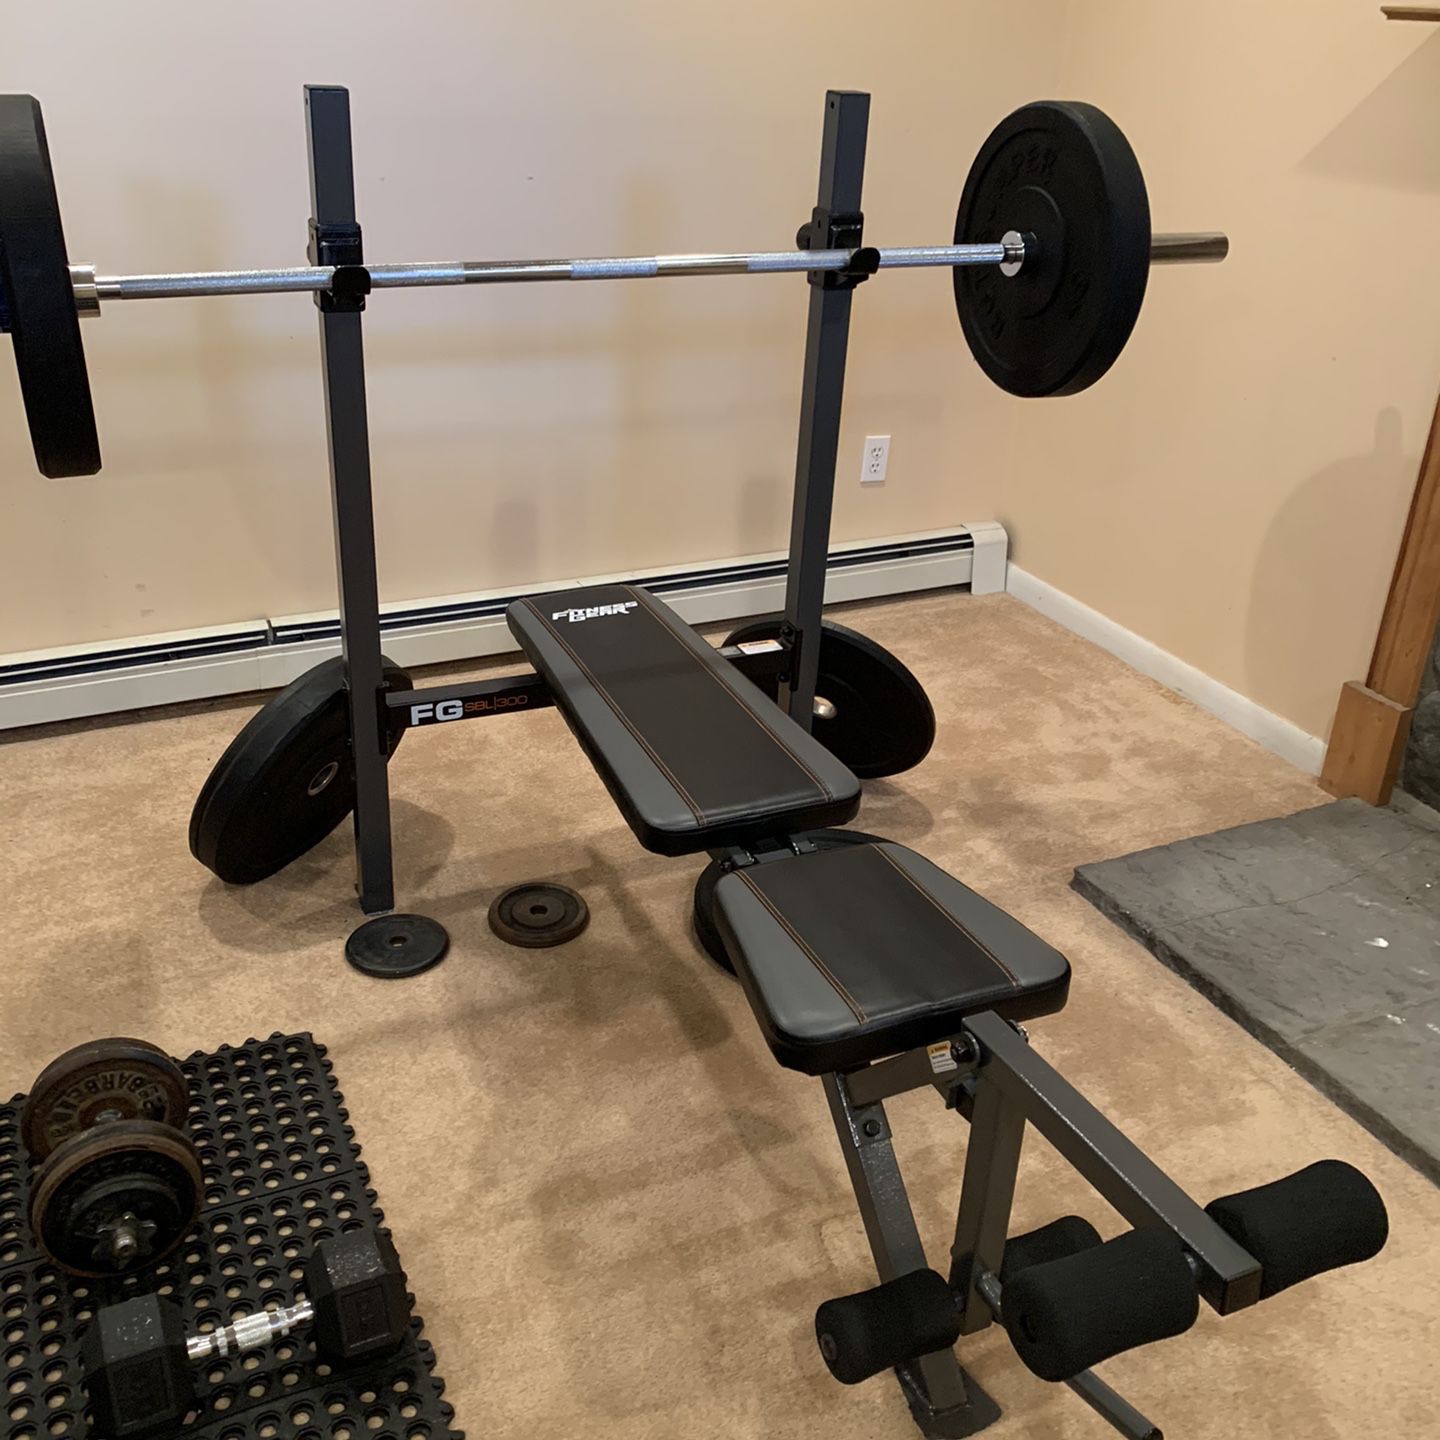 Weights And Olympic Bar Not Inculded. Only Bench